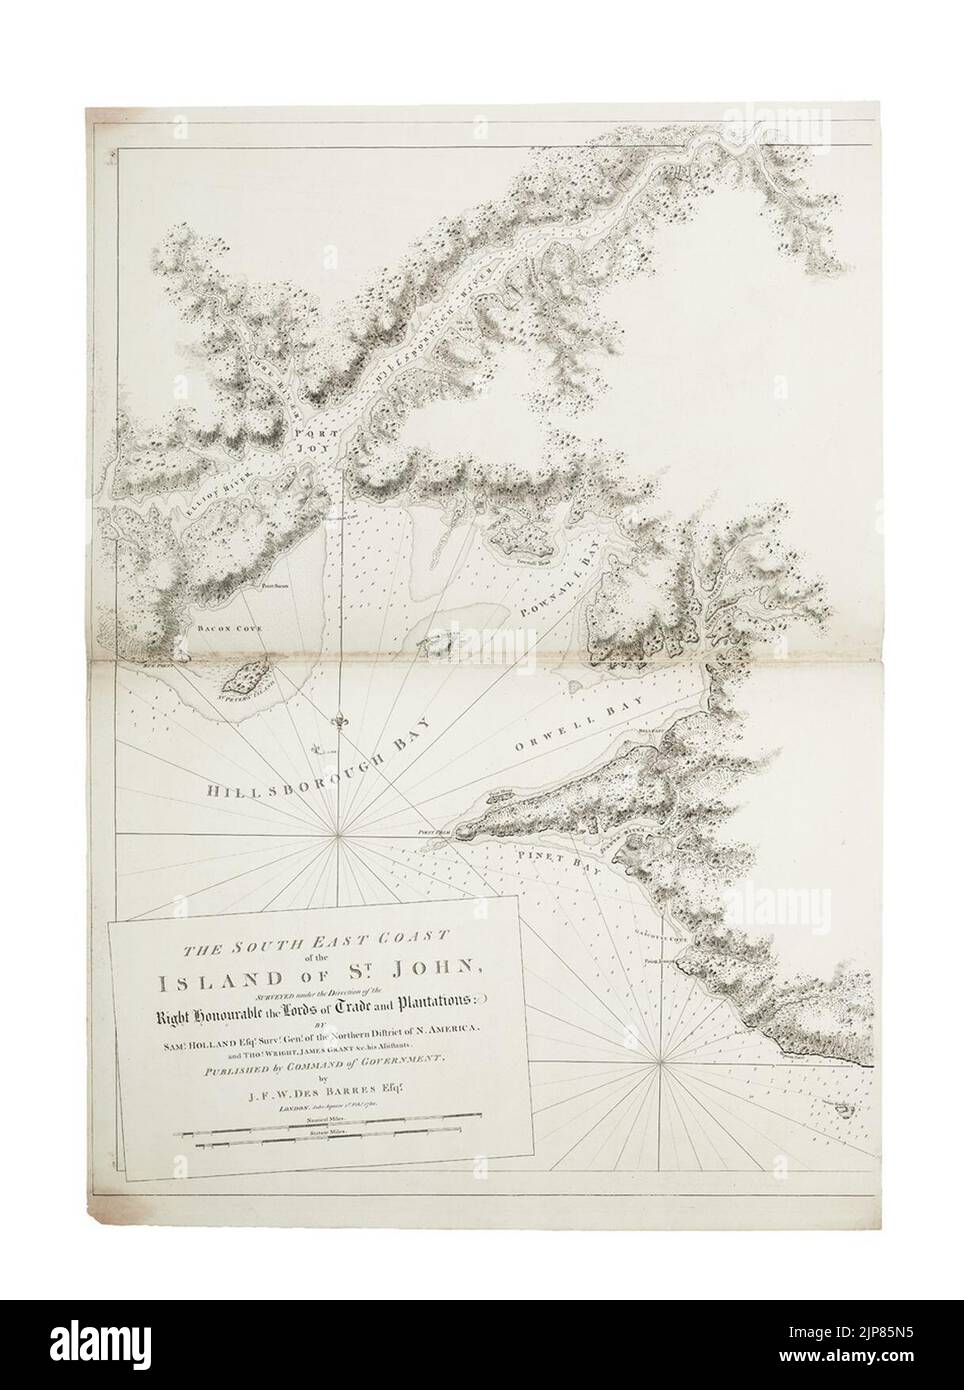 The south east coast of the Island of St. John, surveyed under the direction of the Right Honourable the Lords of Trade and Plantations- by Saml. Holland Esqr. Survr. Genl. of the Northern District of North America, and Stock Photo